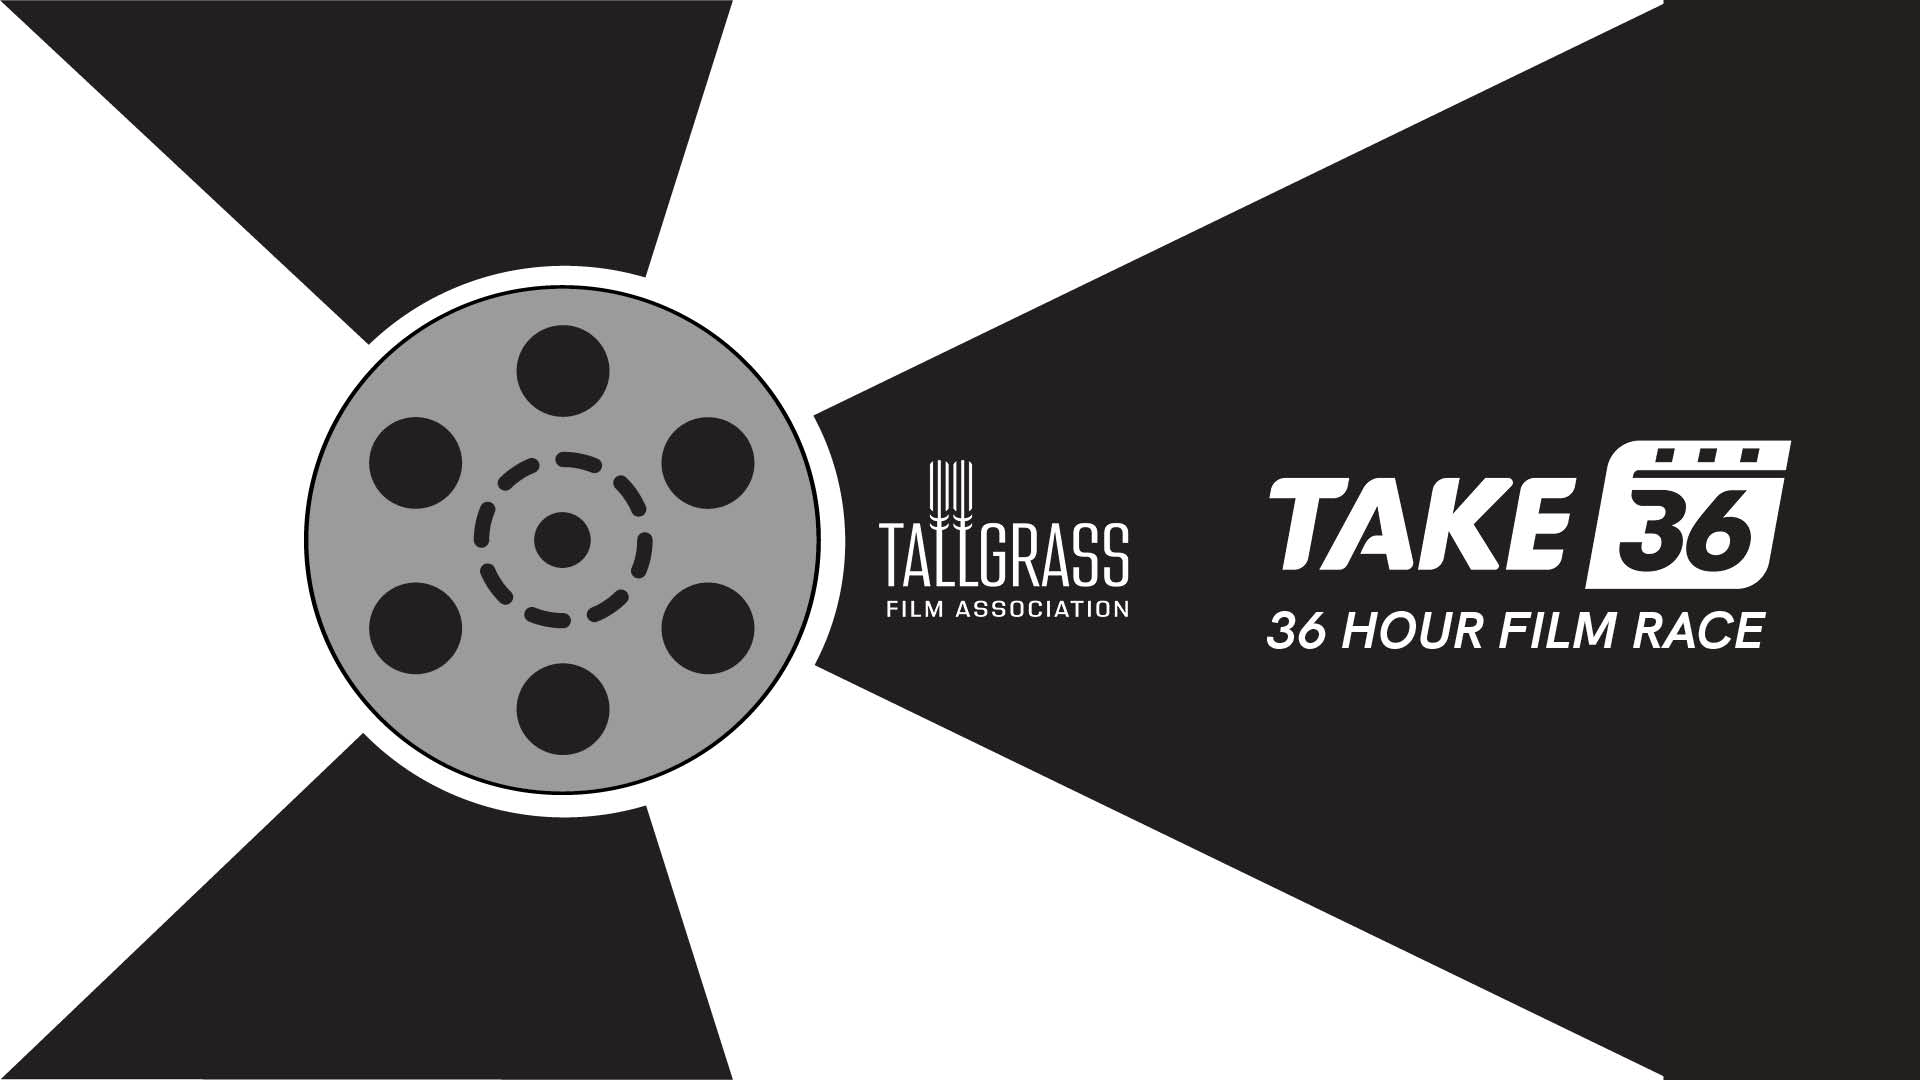 Black and white Wichita flag with a film reel in the middle, Tallgrass Film Association Logo, Take 36 logo, 36 Hour Film Race